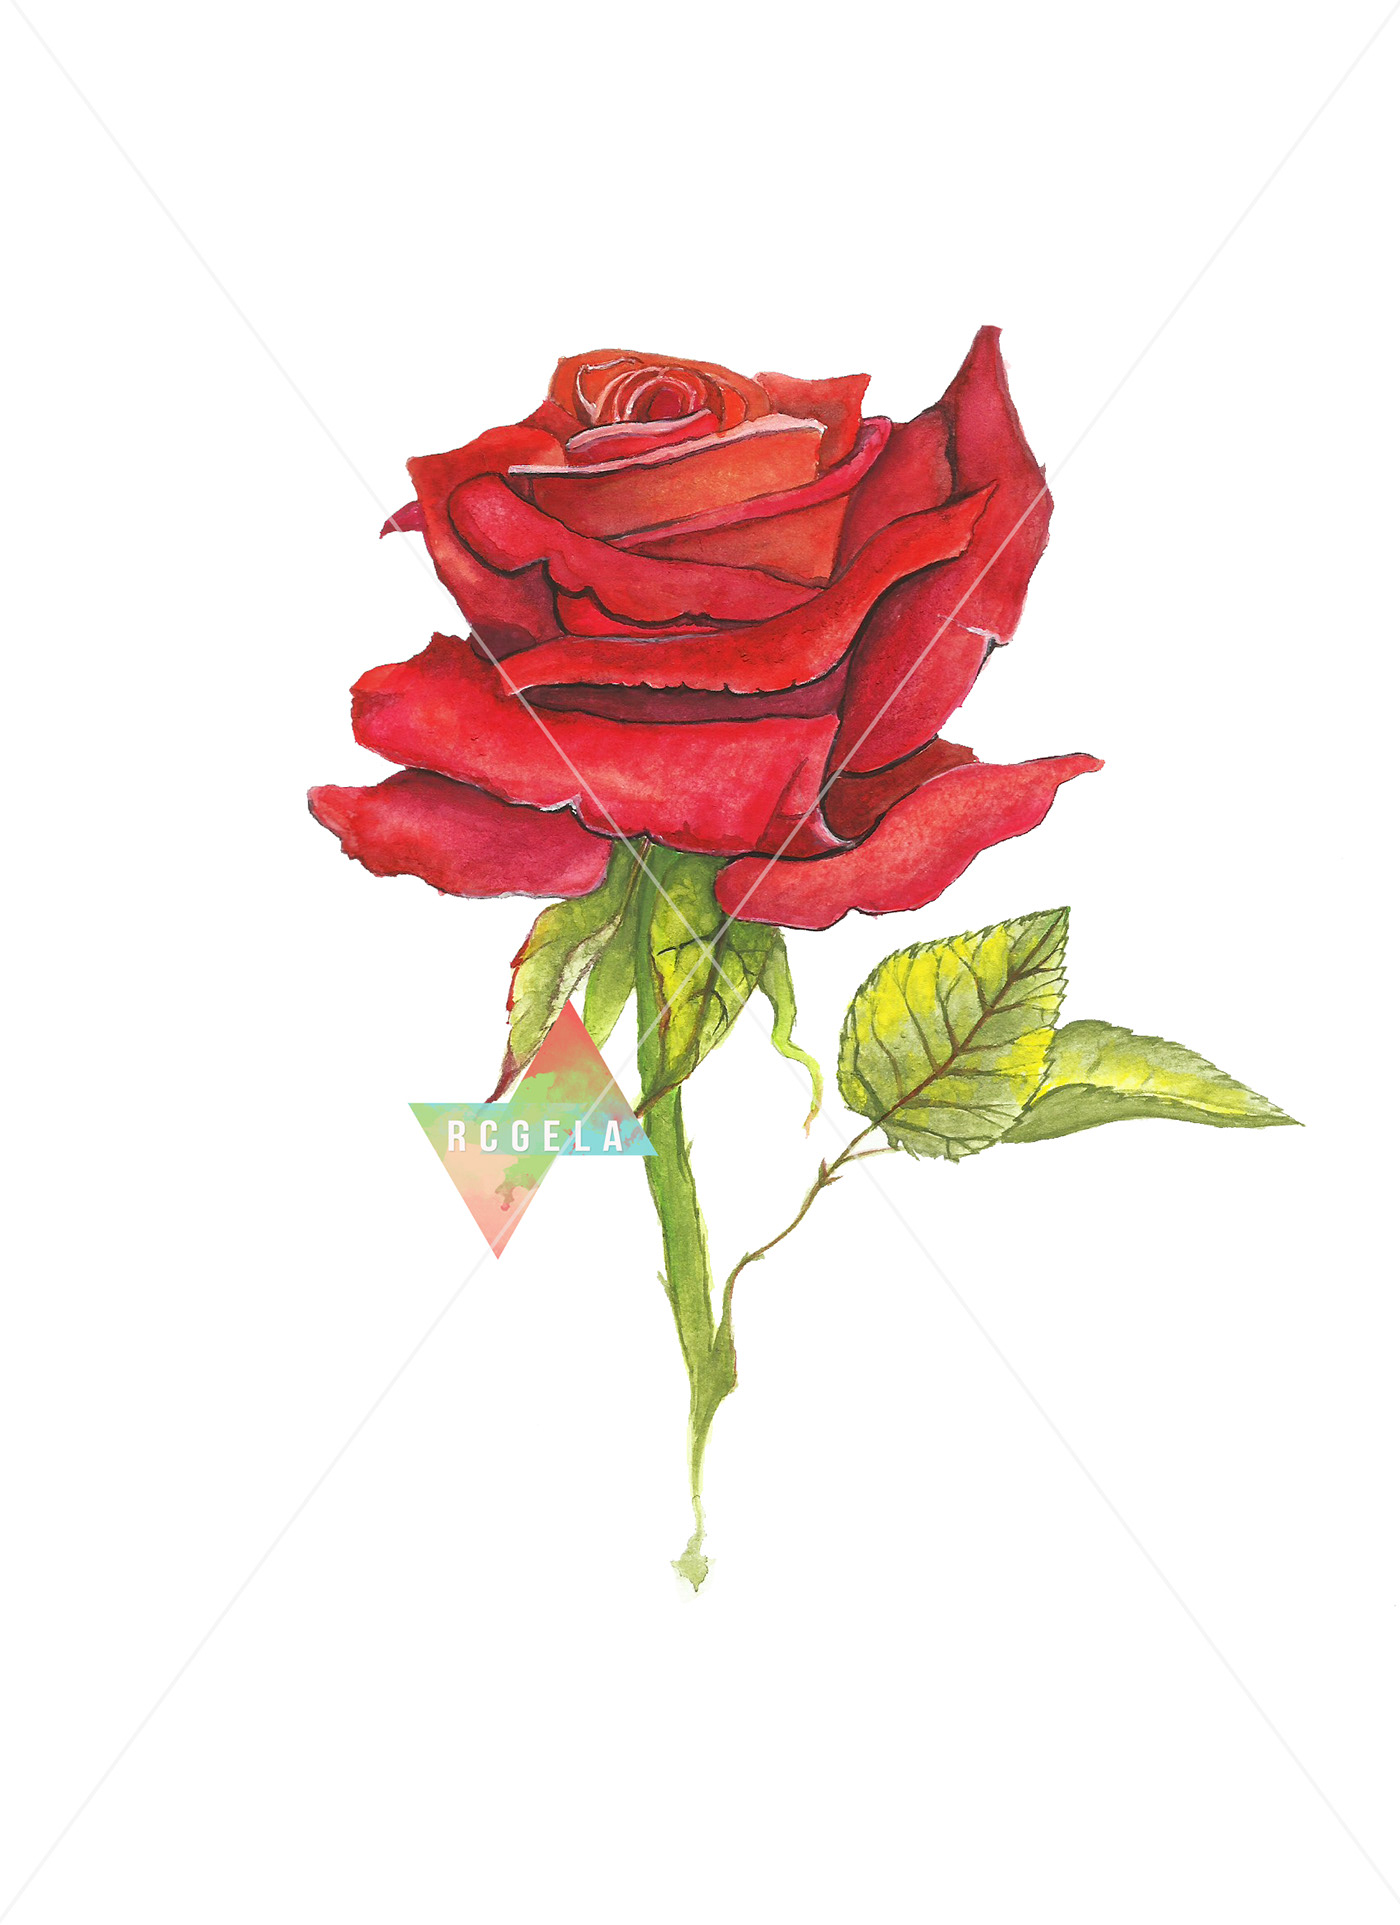 rose watecolor painting   ILLUSTRATION  red rose traditional